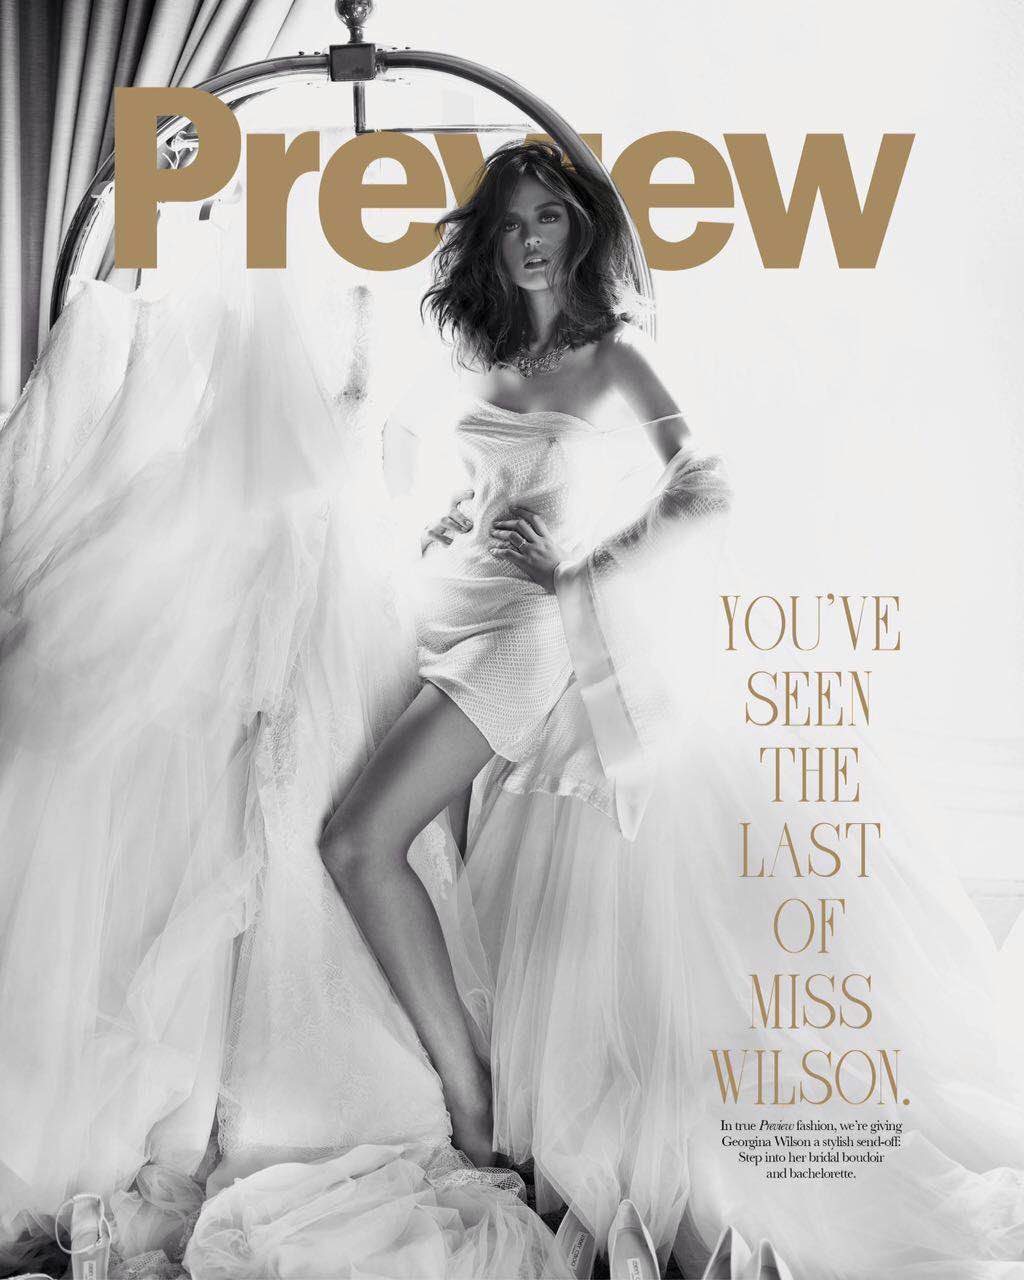 Photo by Mark Nicdao. Image provided by Preview magazine 